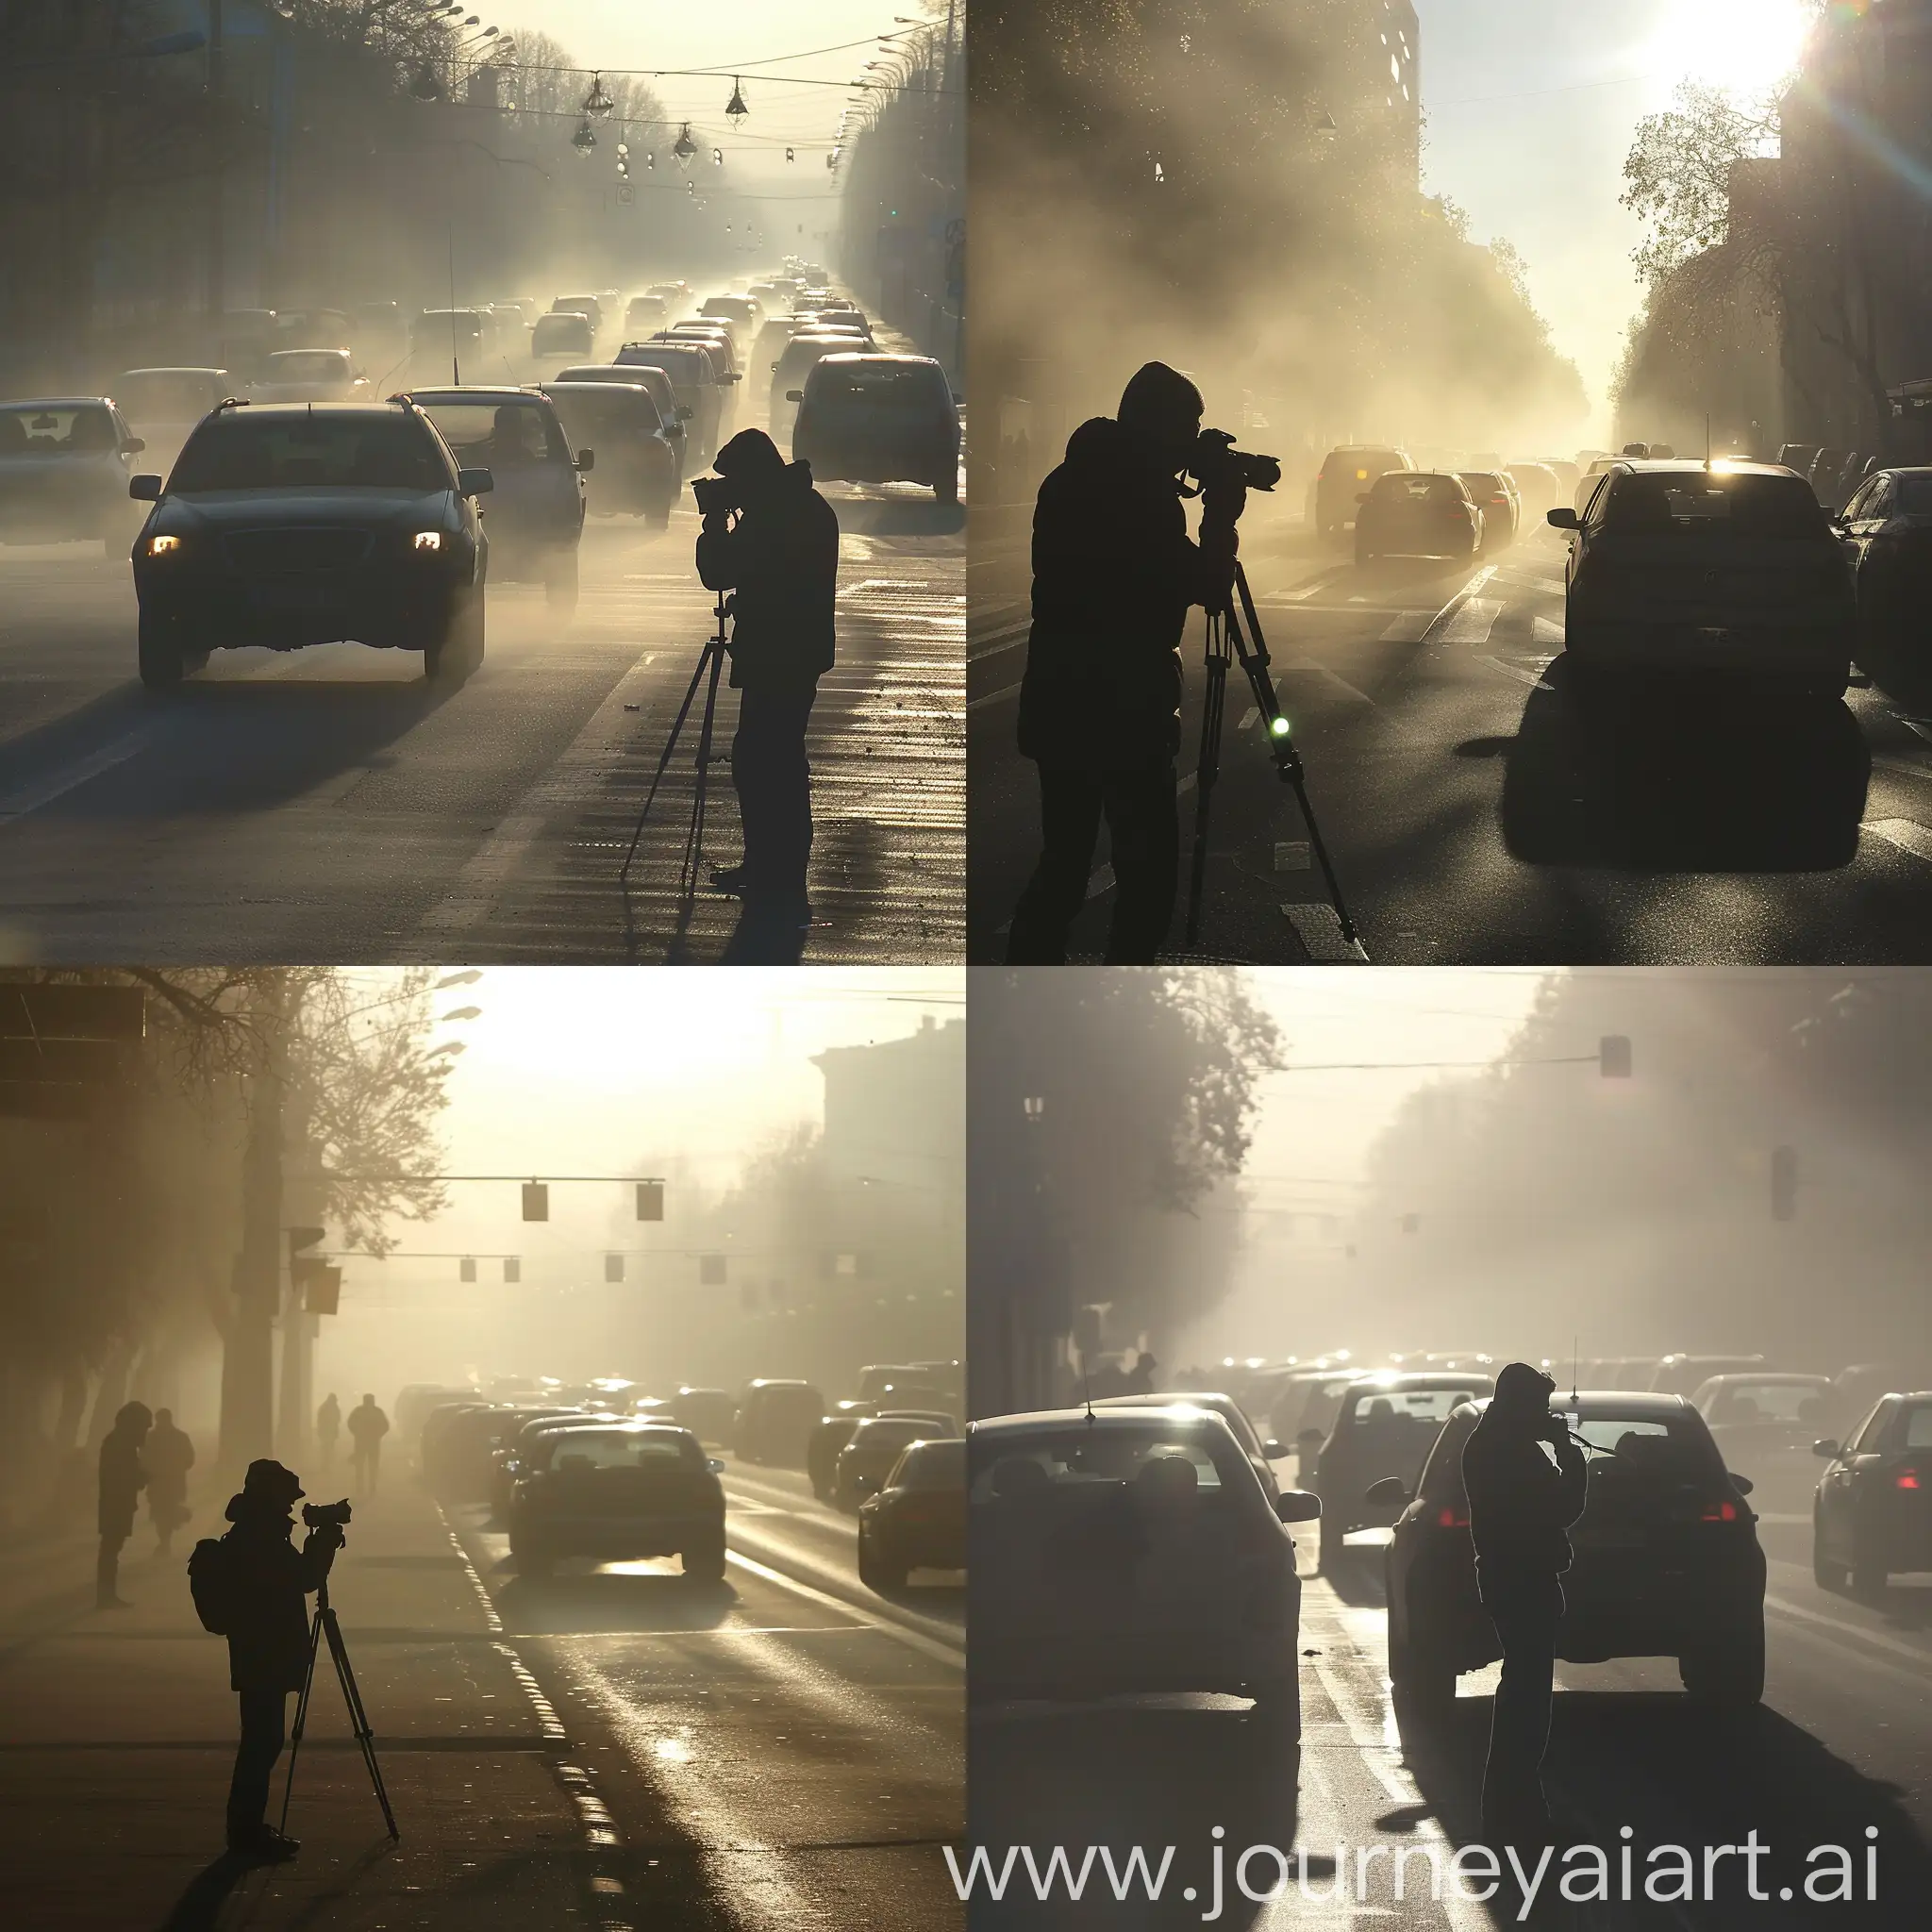 Urban-Street-Photography-Capturing-City-Life-in-the-Sun-and-Fog